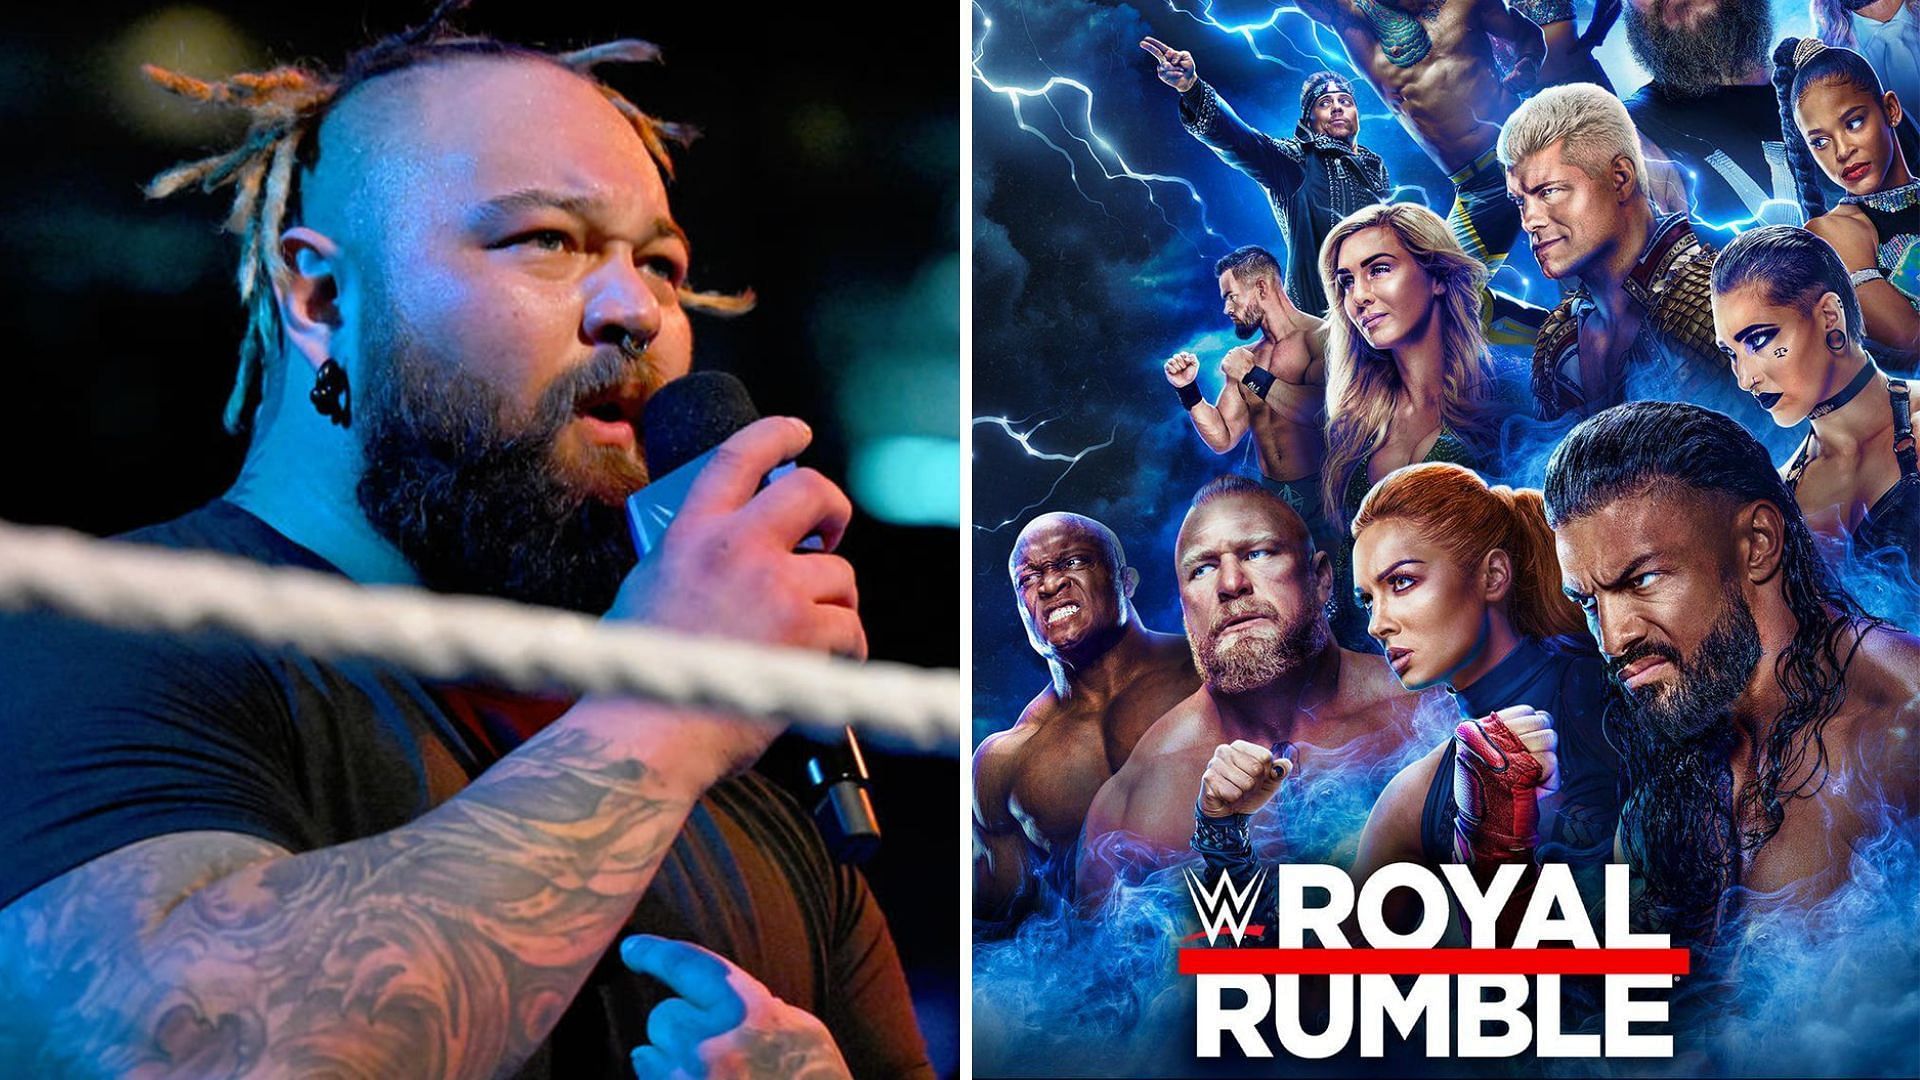 Bray Wyatt is set to battle LA Knight at the WWE Royal Rumble